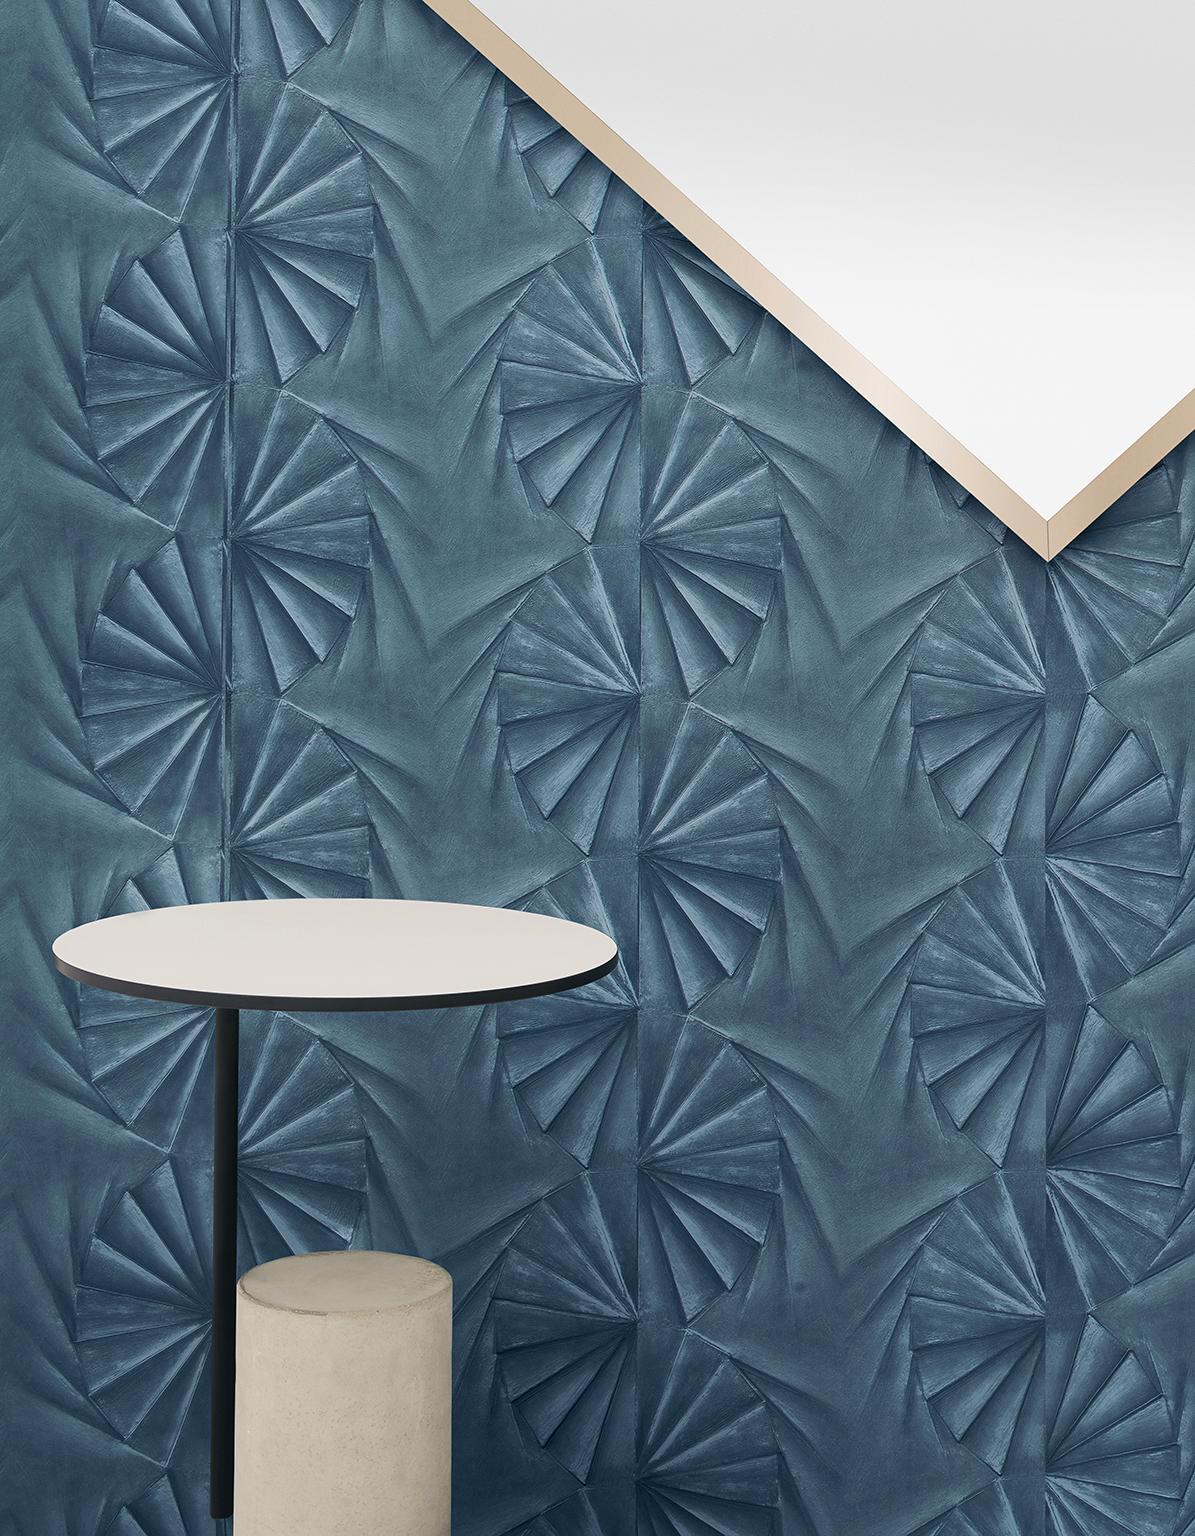 Wall&decò turns from photographs to wall paintings, from tromp-l'oeils to macro-designs on material backgrounds into a vertical wall pattern, with truly original visual effects.

Embossed vinyl wallpaper with nonwoven backing, 3D surface

Roll